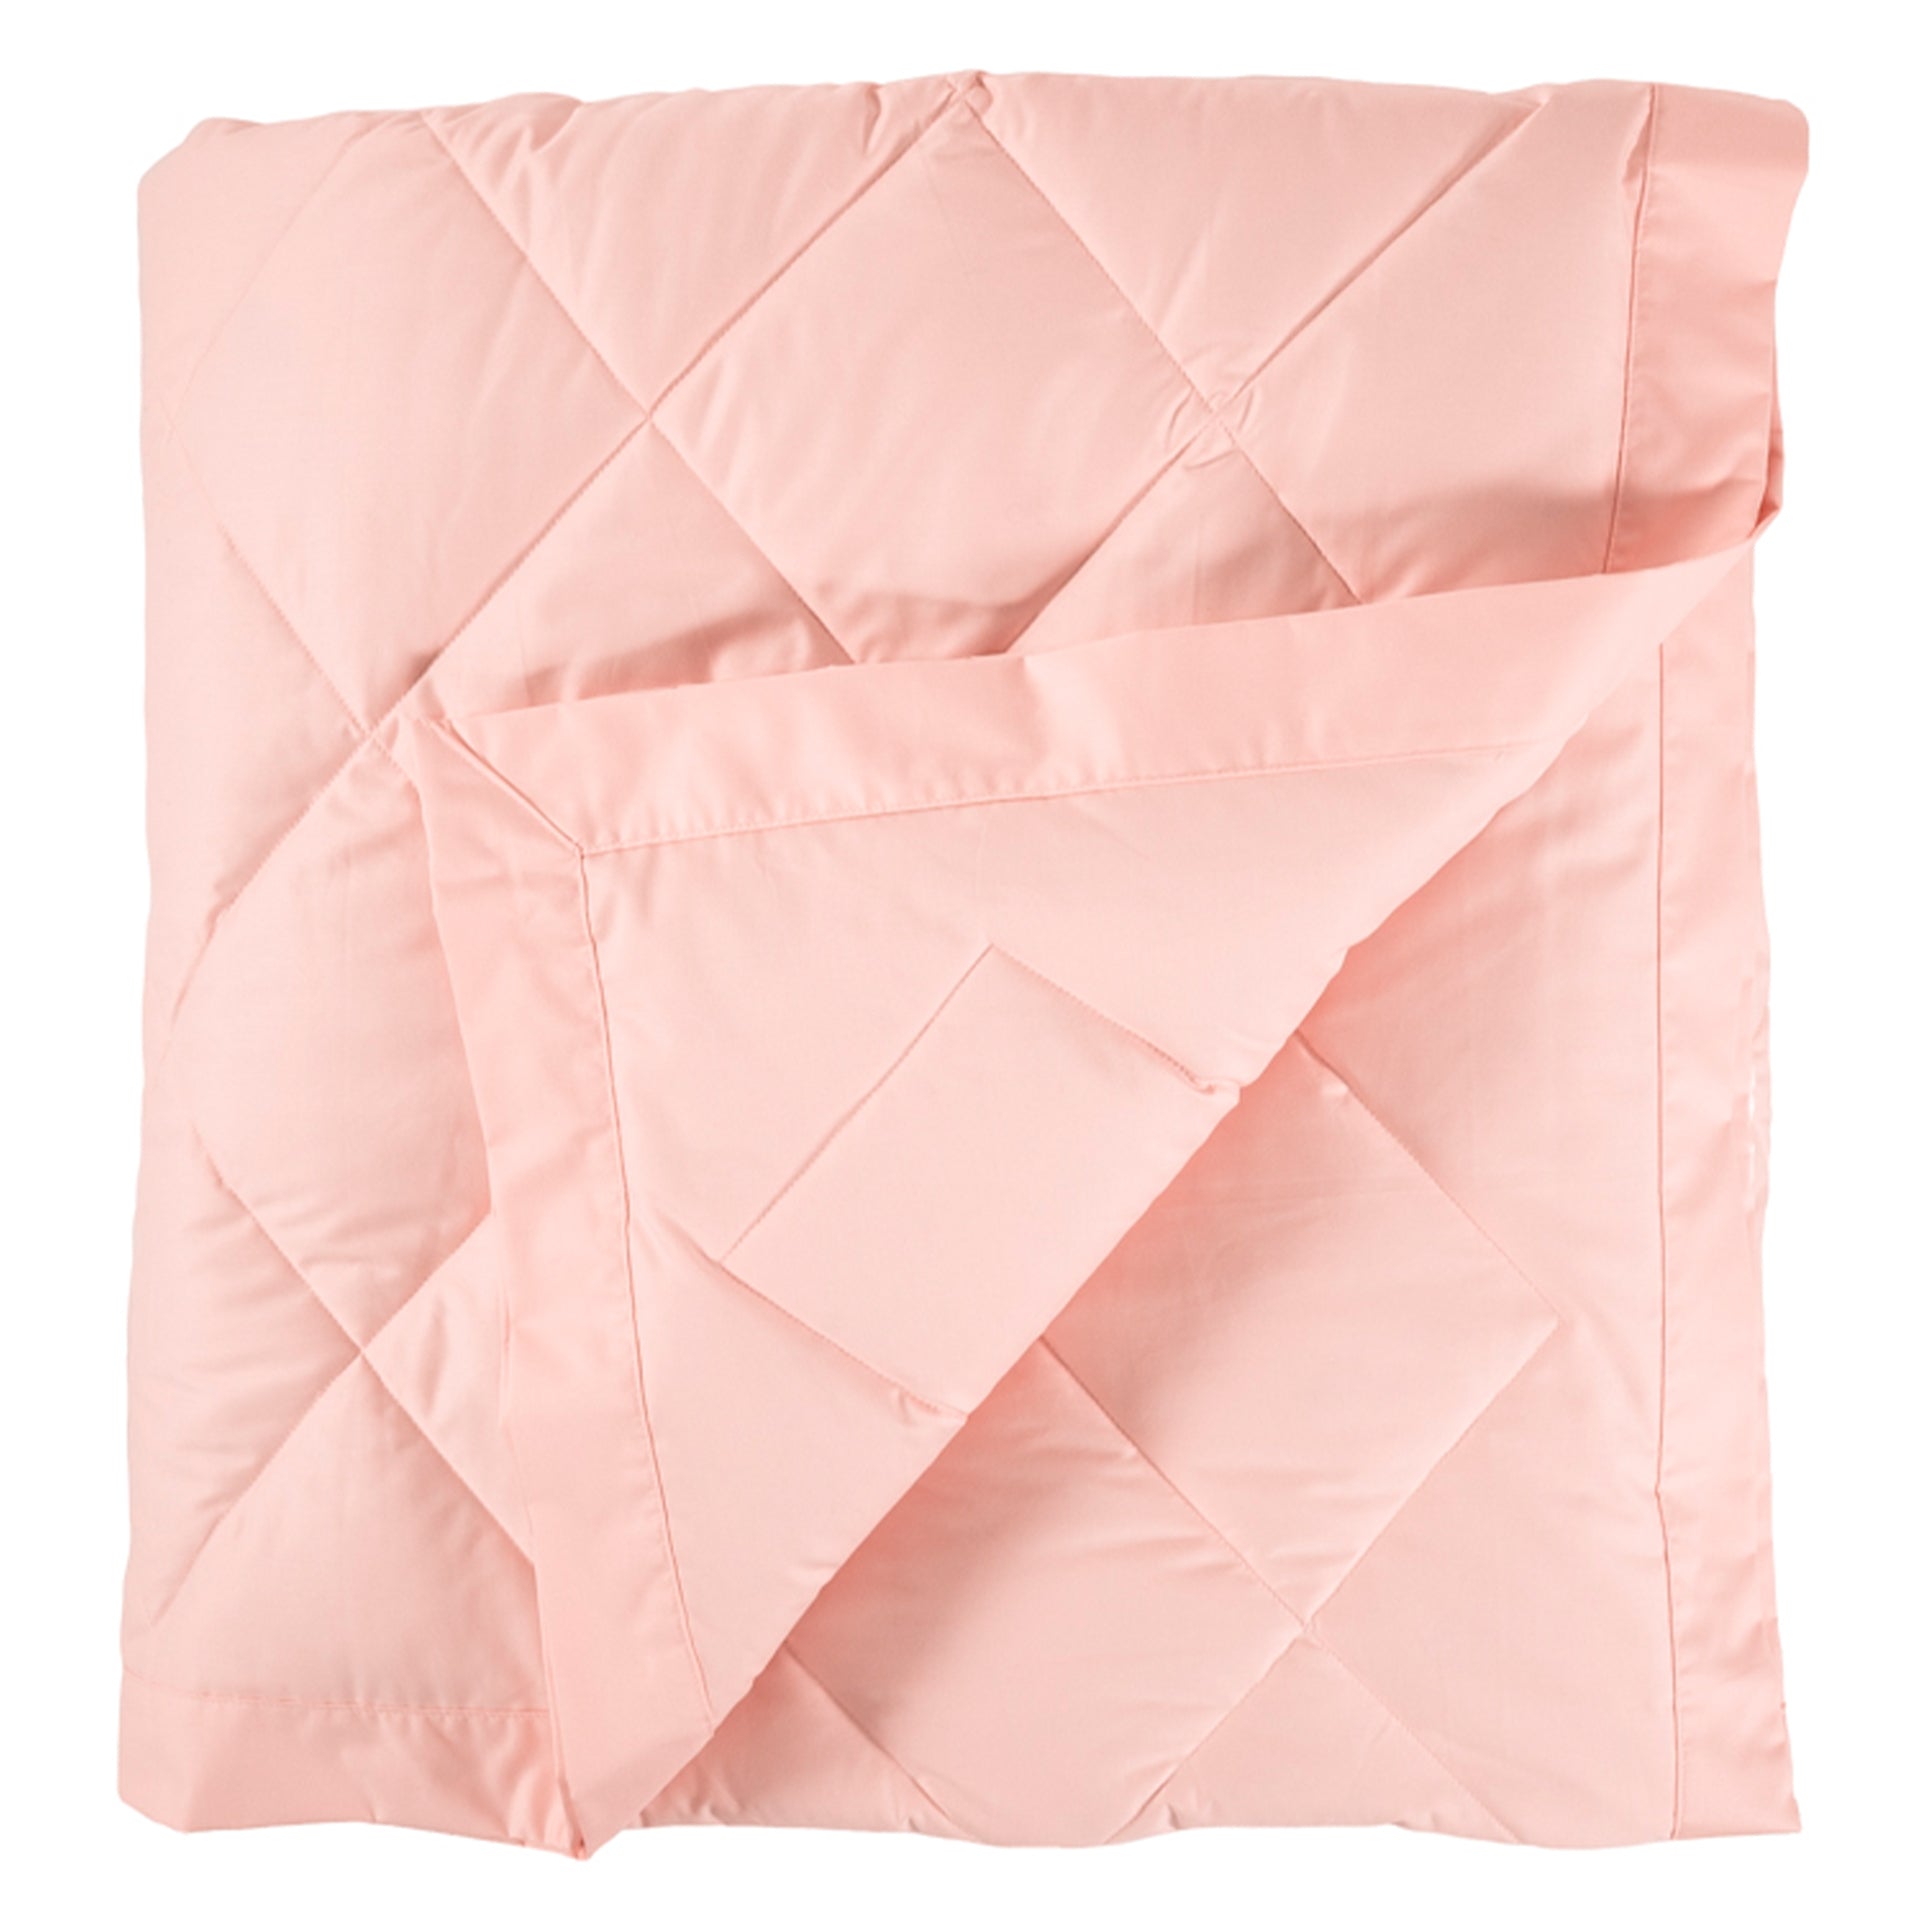 scandia home down blanket in the color petal, folded 